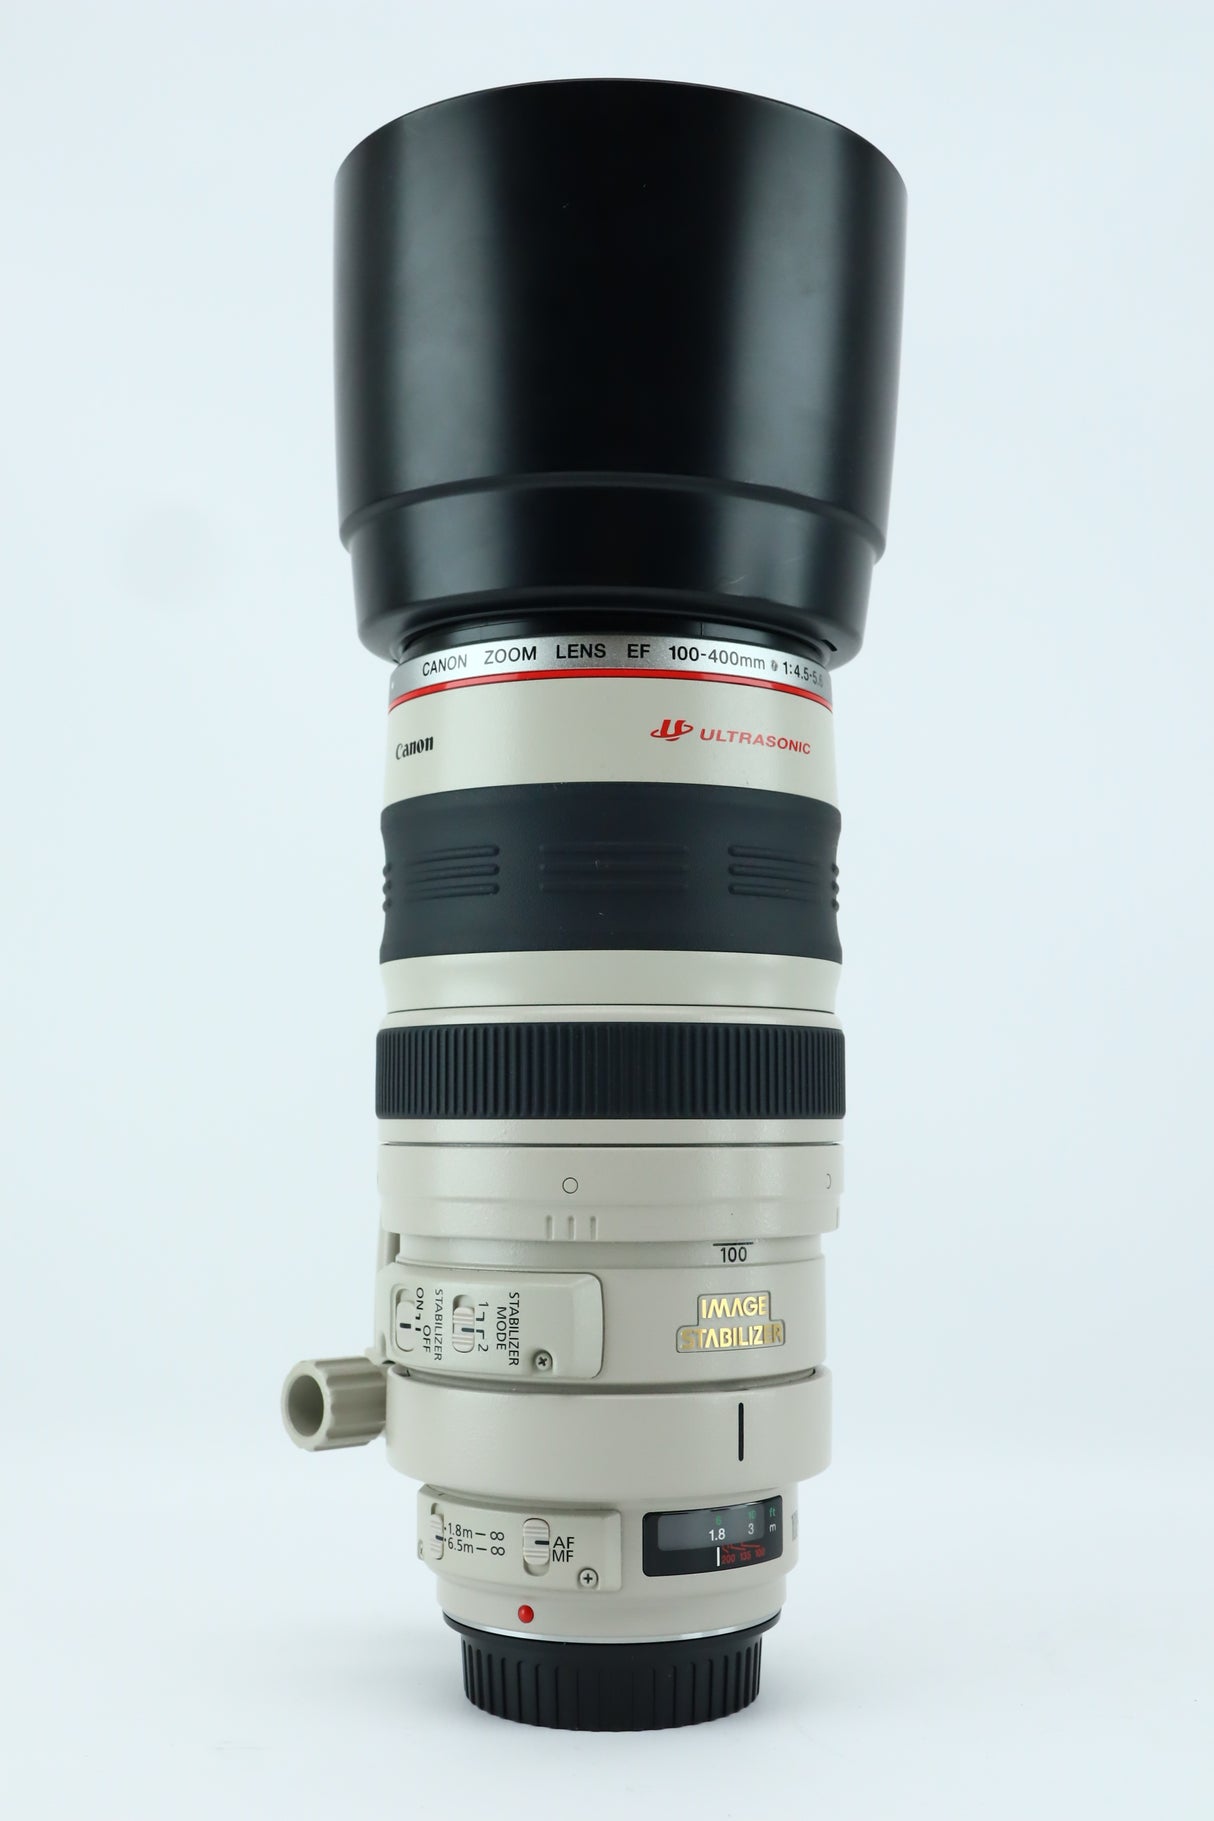 Canon zoom lens EF 100-400mm 1:4.5-5.6 L IS